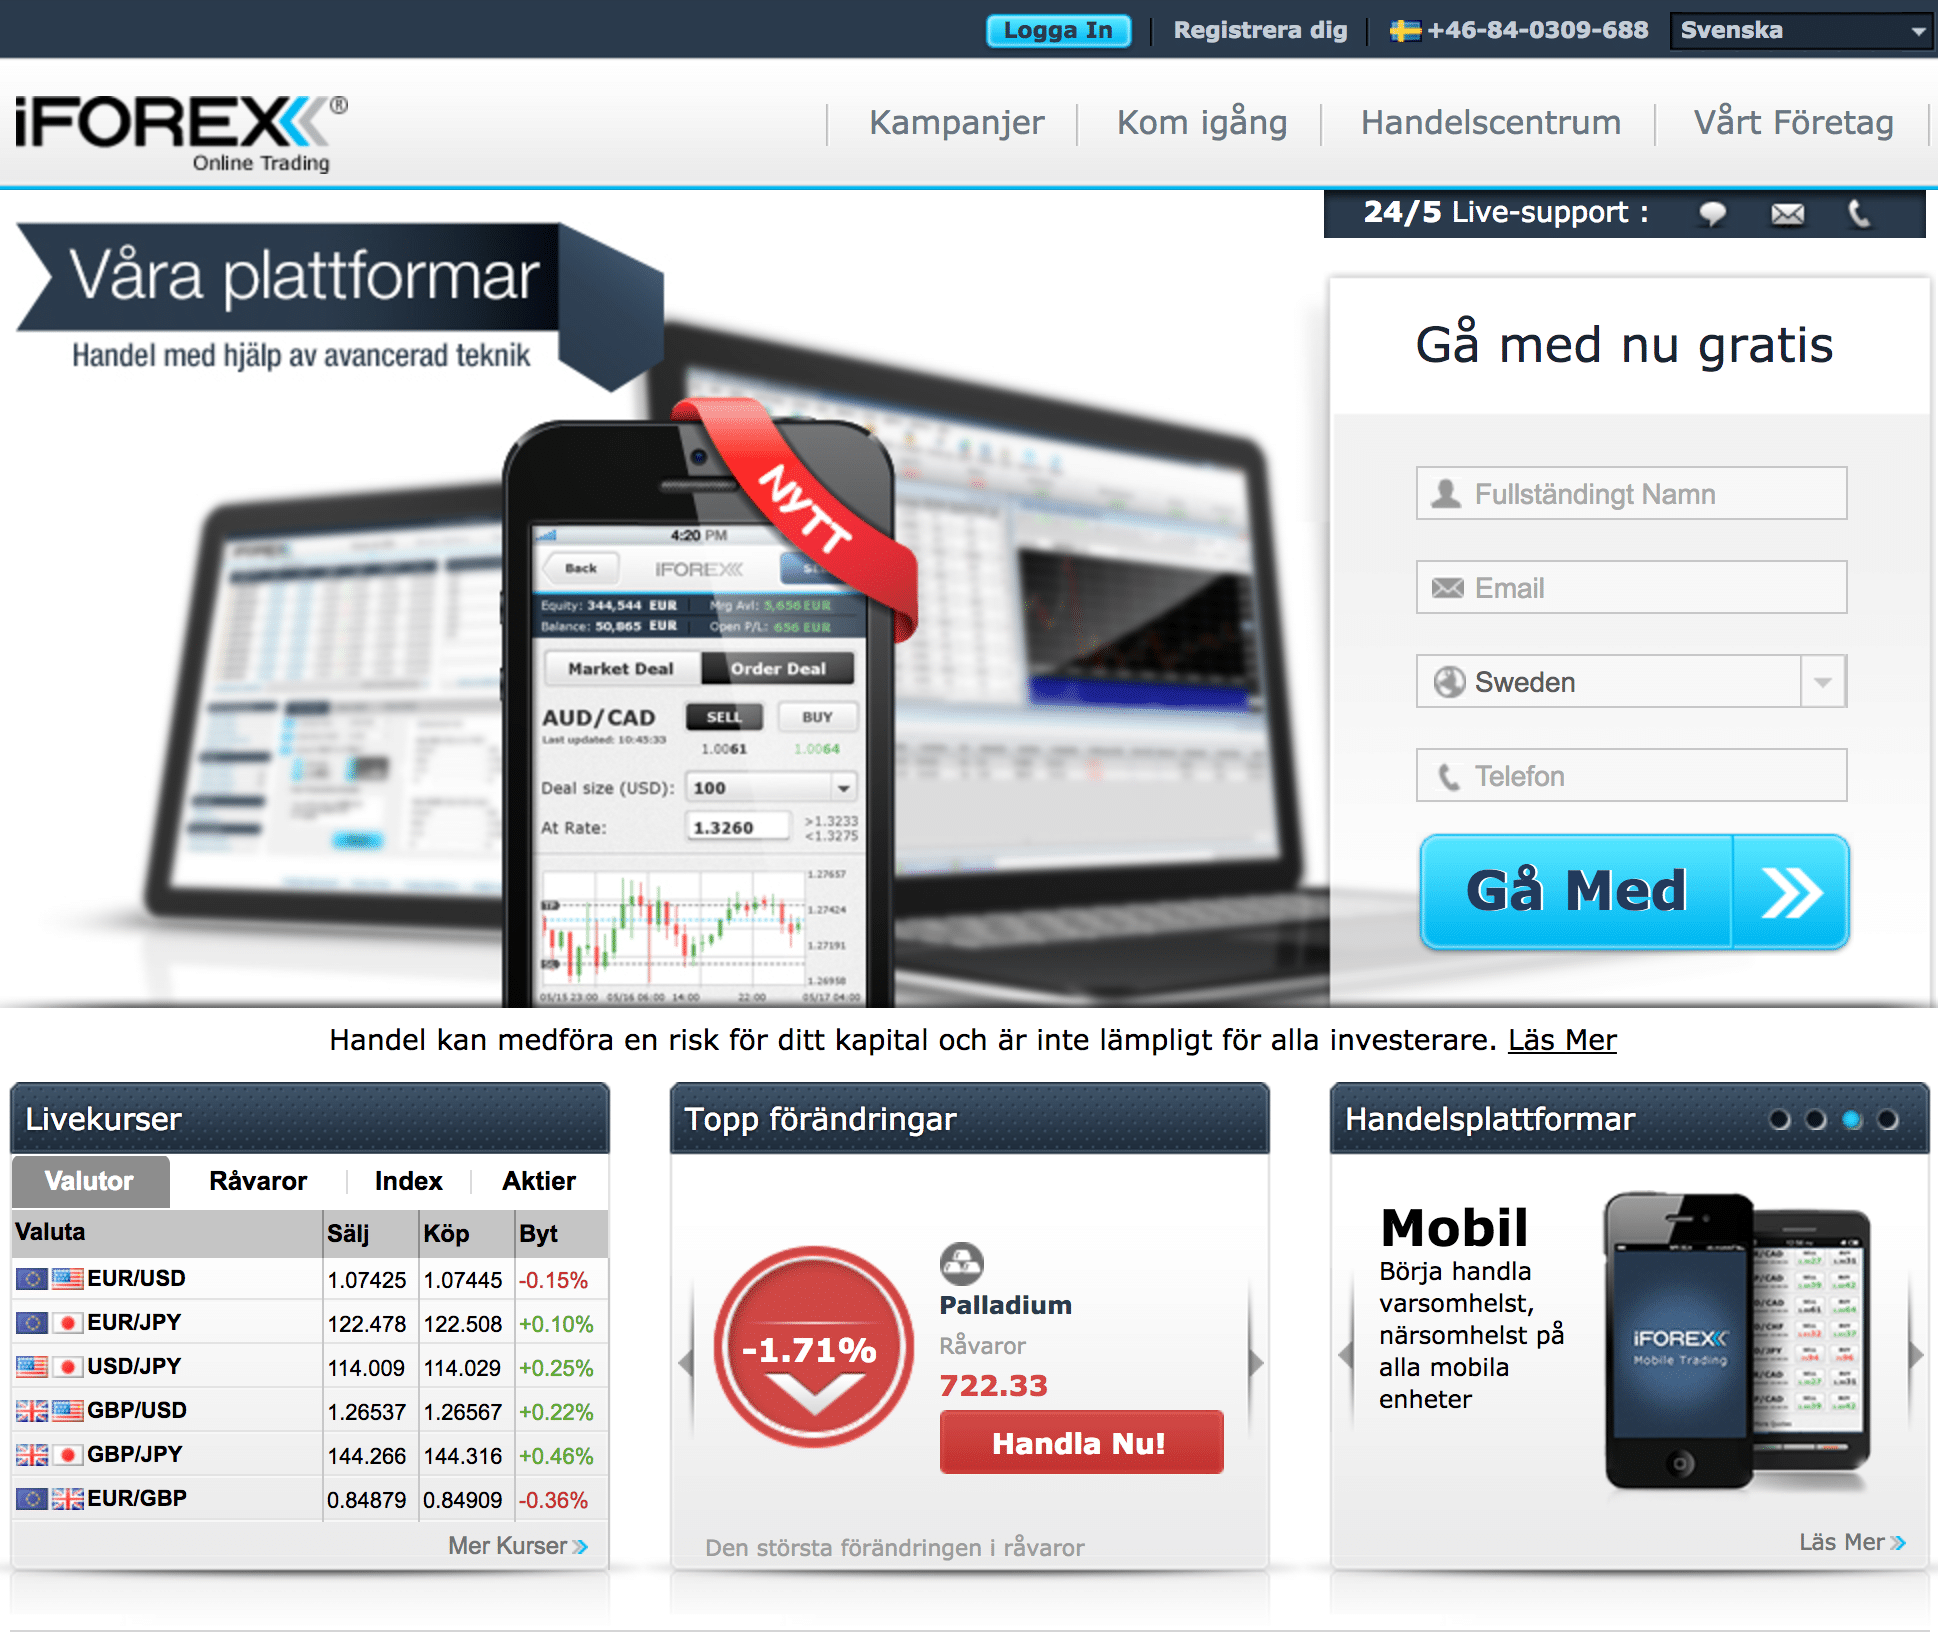 how genuine is iforex online trading